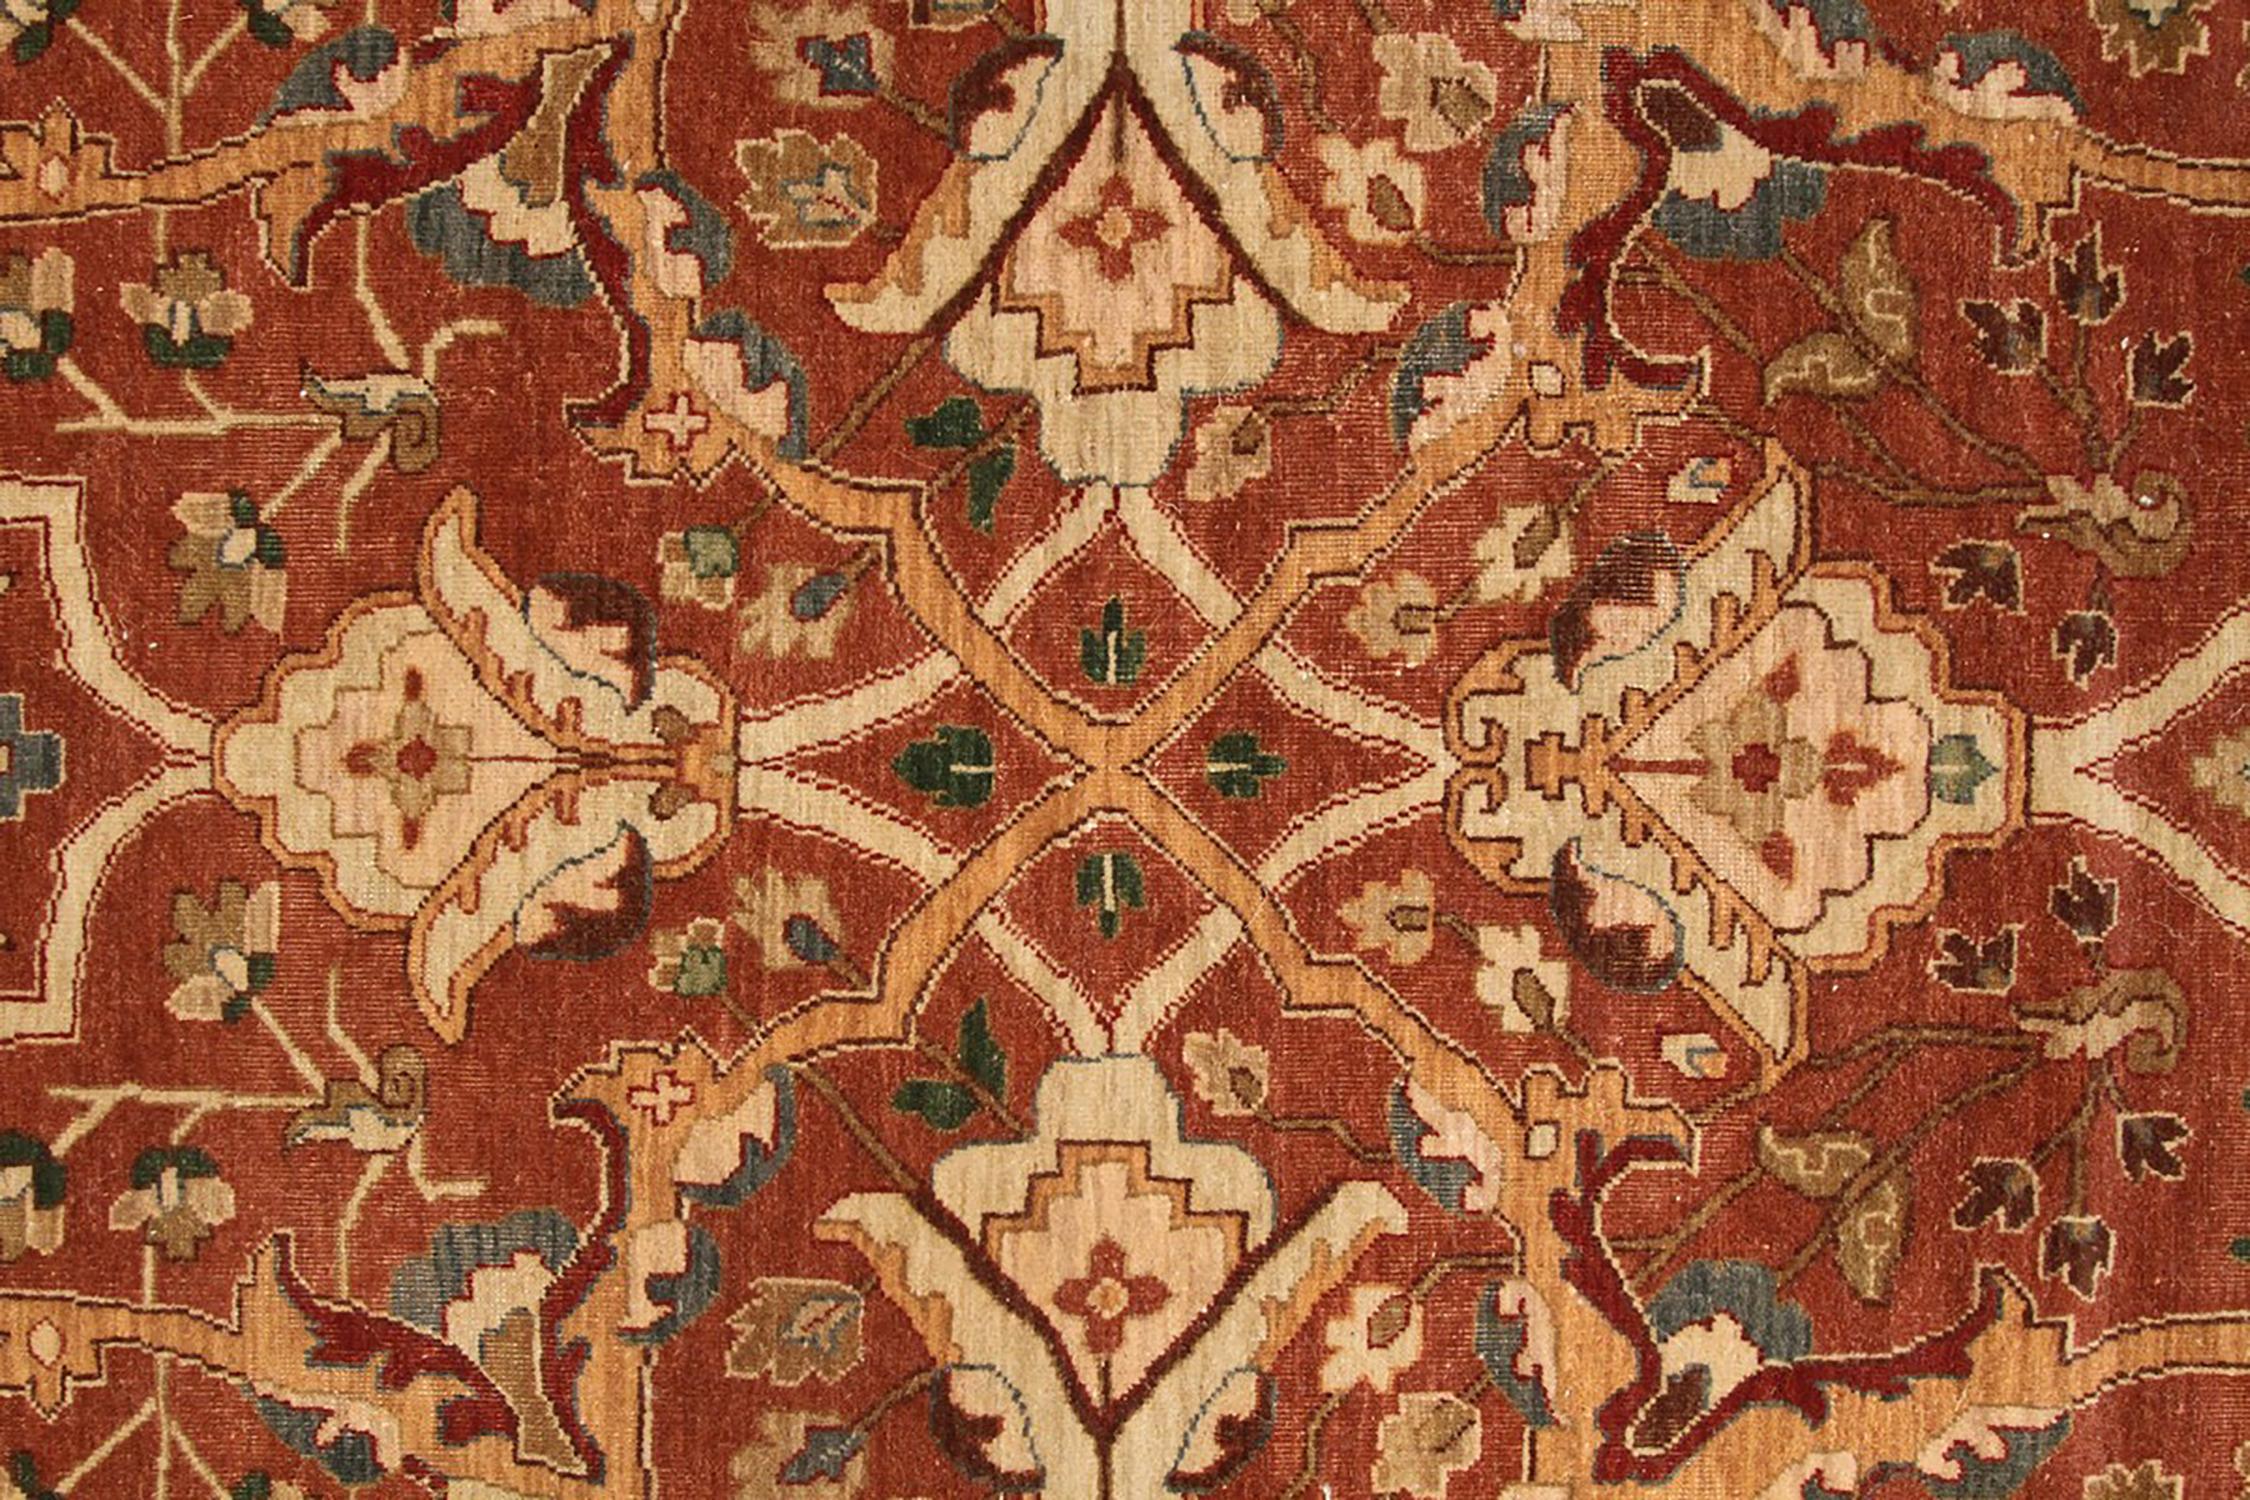 A 12 x 18 Persian rug homage from the Modern Classics collection by Rug & Kilim, hand knotted in wool with a particular influence from a transitional Tabriz rug style this near palace sized rug in handsome beige brown colorway hues. 

On the design: